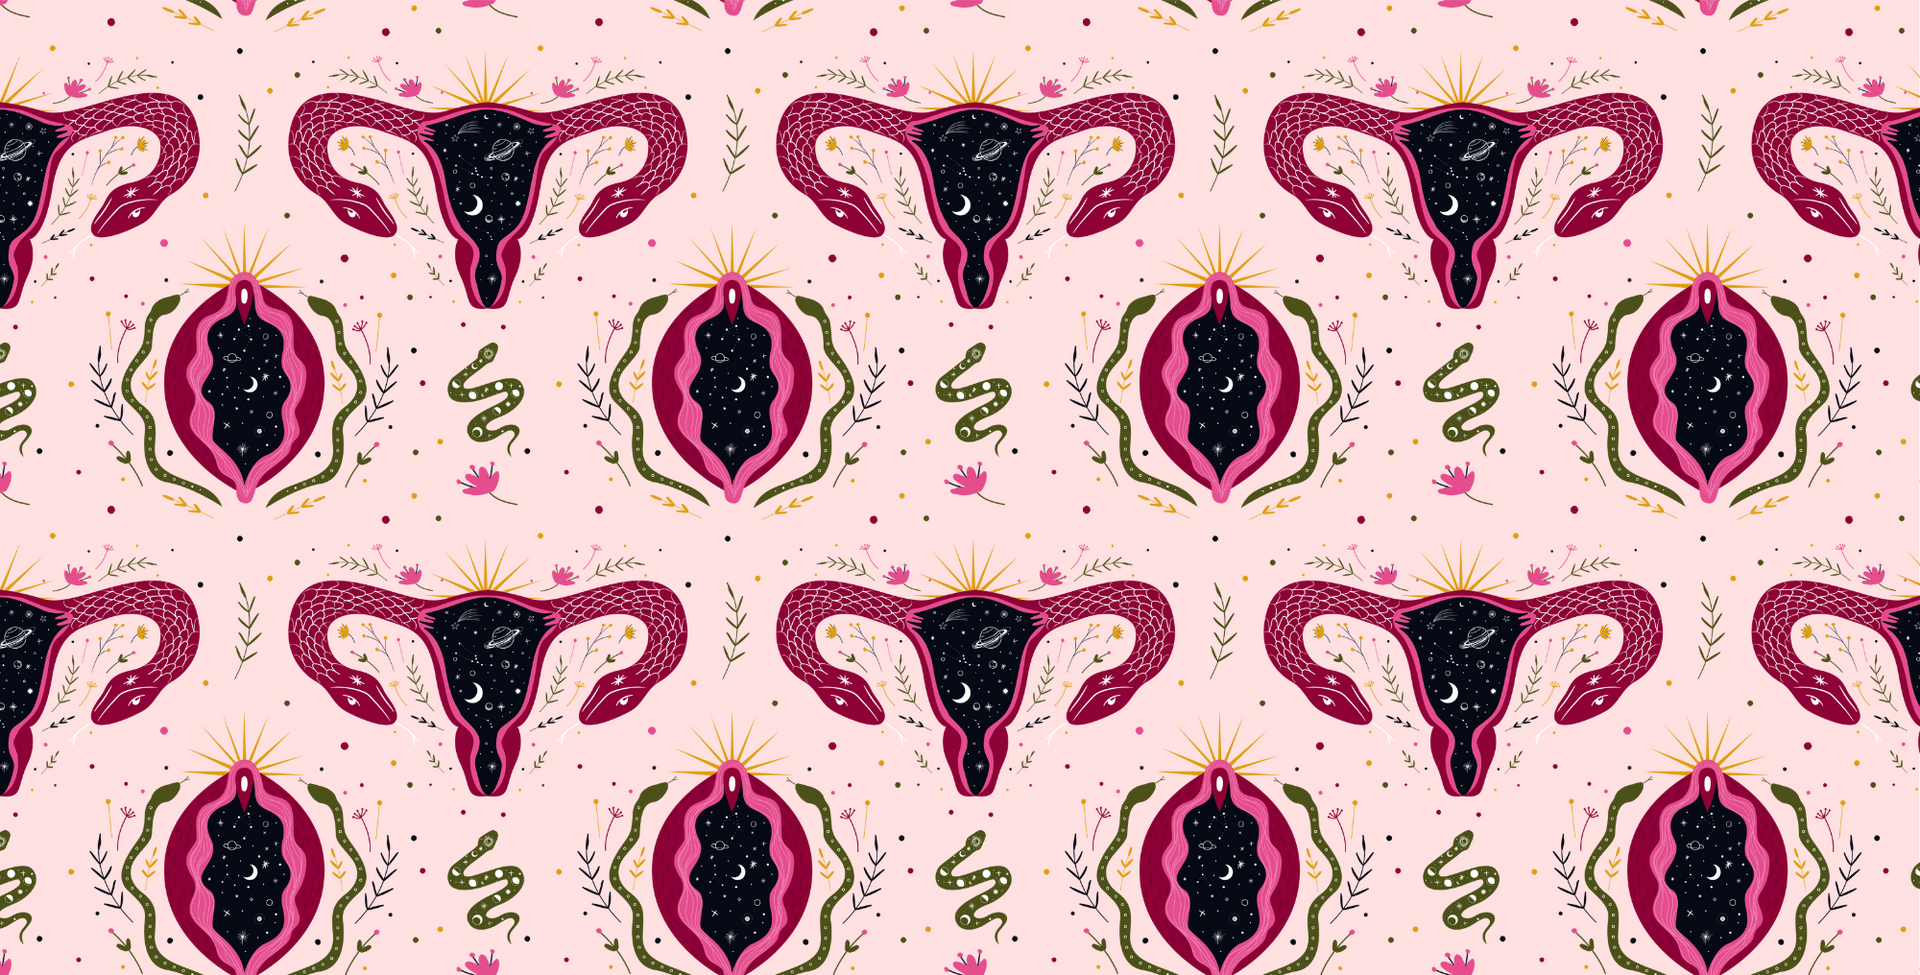 female reproductive anatomy displayed as wallpaper